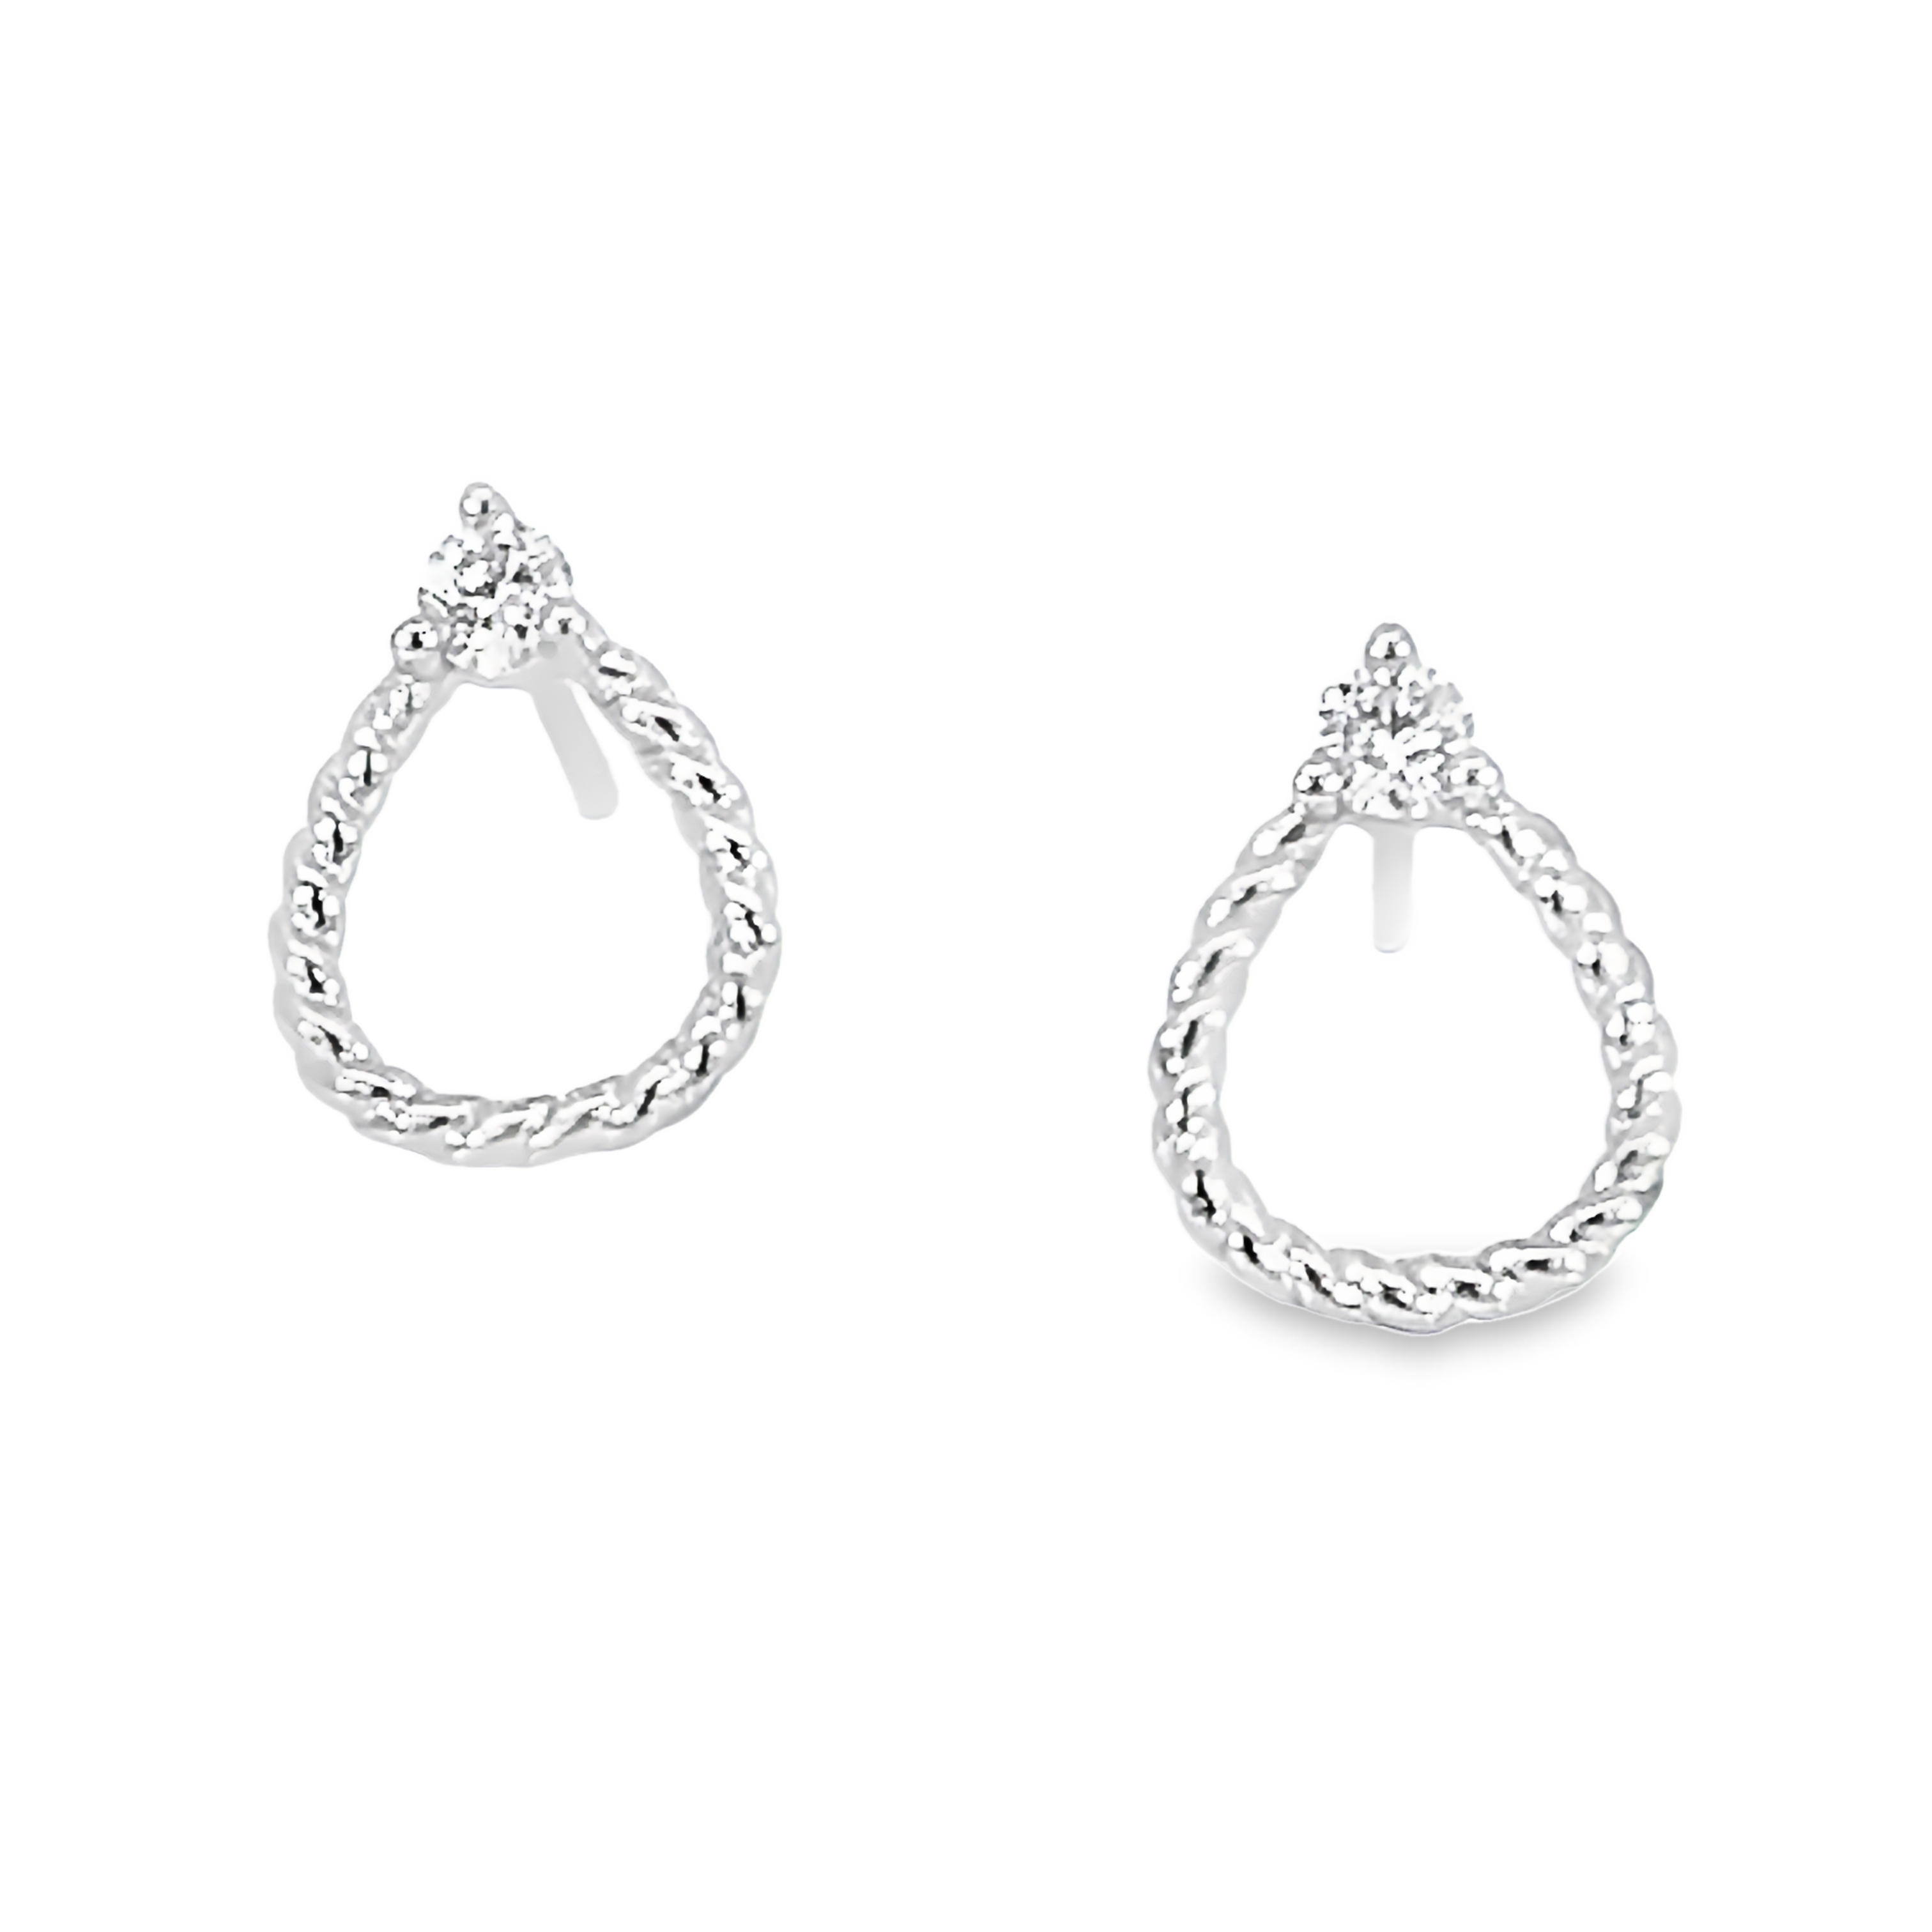 14 Karat white gold earrings with 2=0.14 total weight round brilliant G I Diamonds